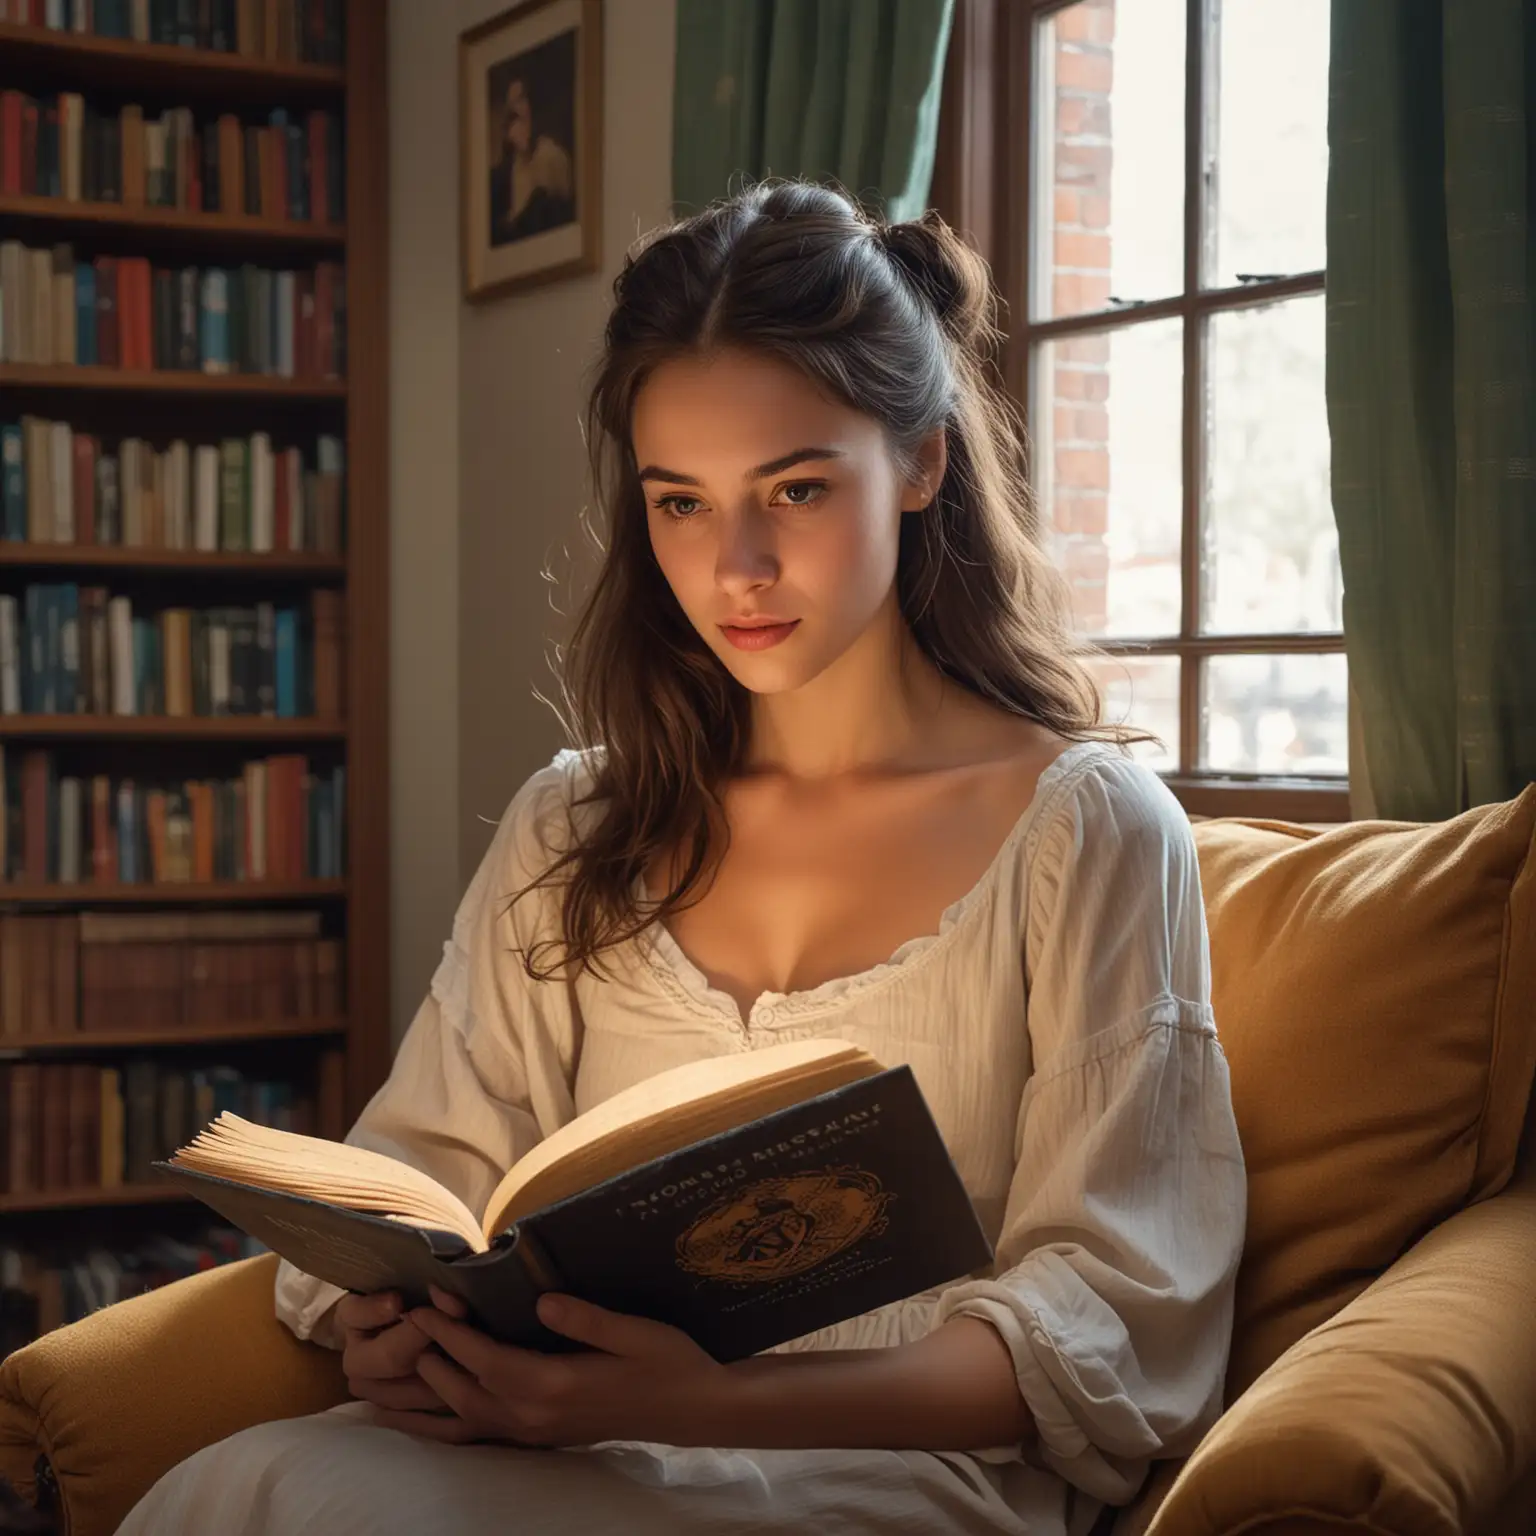 Young Woman Enraptured by Adventure Novel in Cozy Reading Nook